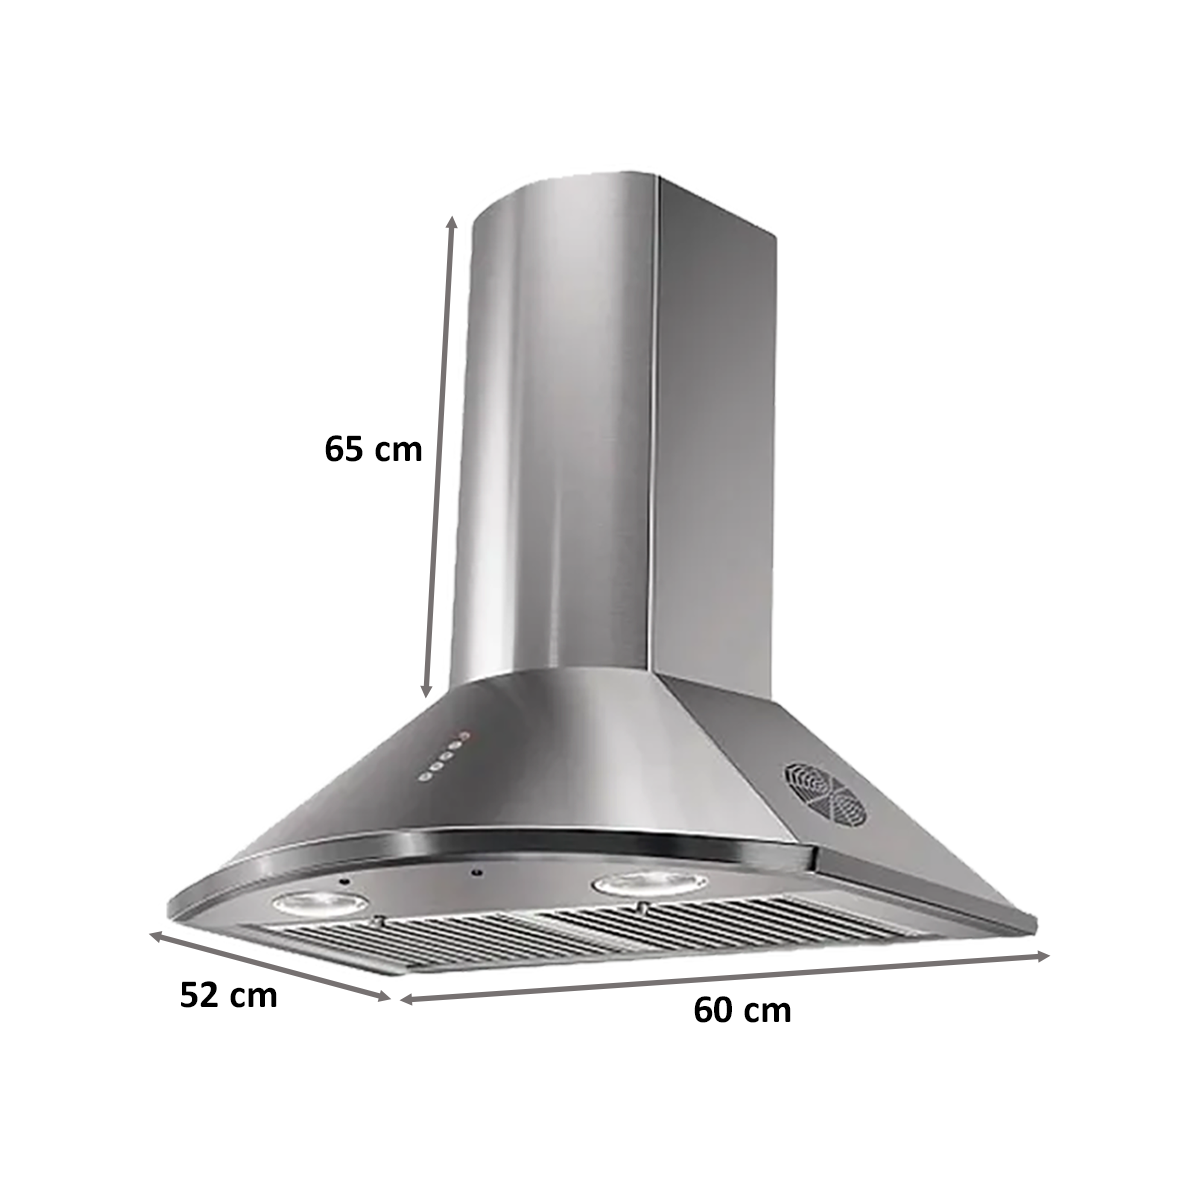 Faber Tender 3D 1295 m³/hr 60cm Wall Mount Chimney (Baffle Filter, T2S2 Max LTW 60, Stainless Steel)_2